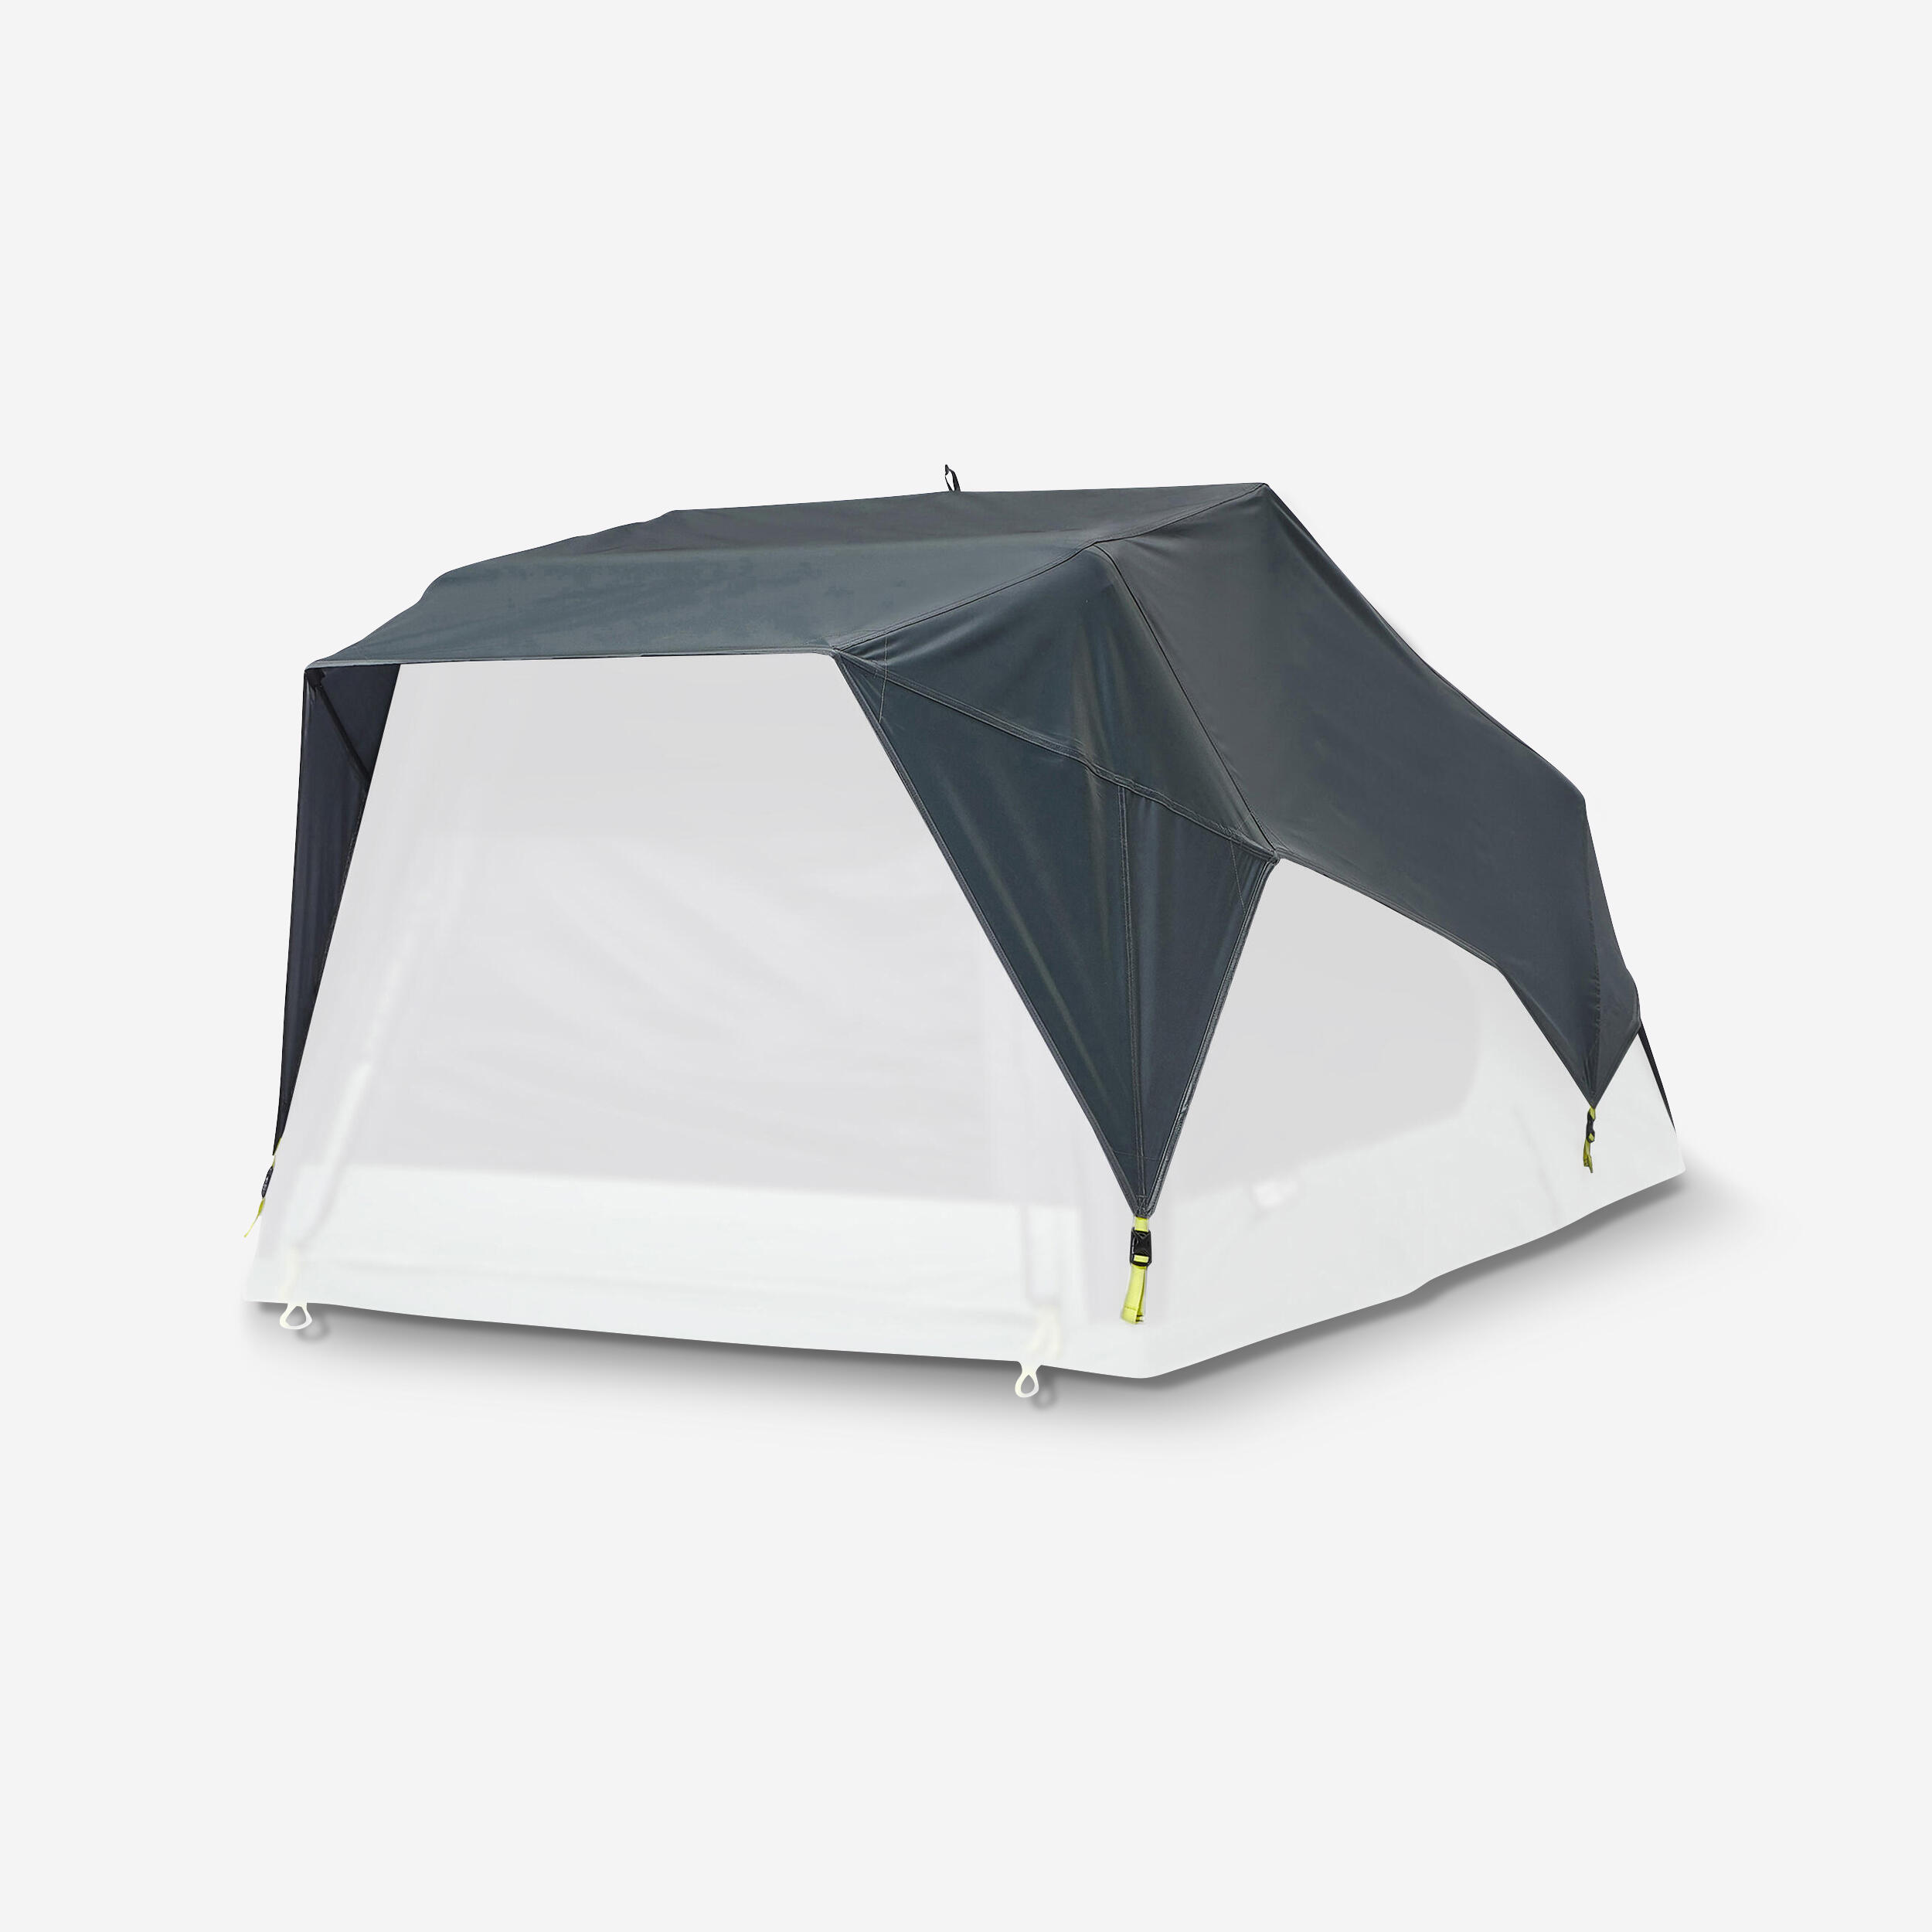 Quechua Double Roof For Tents MH900 Fresh & Black 2p